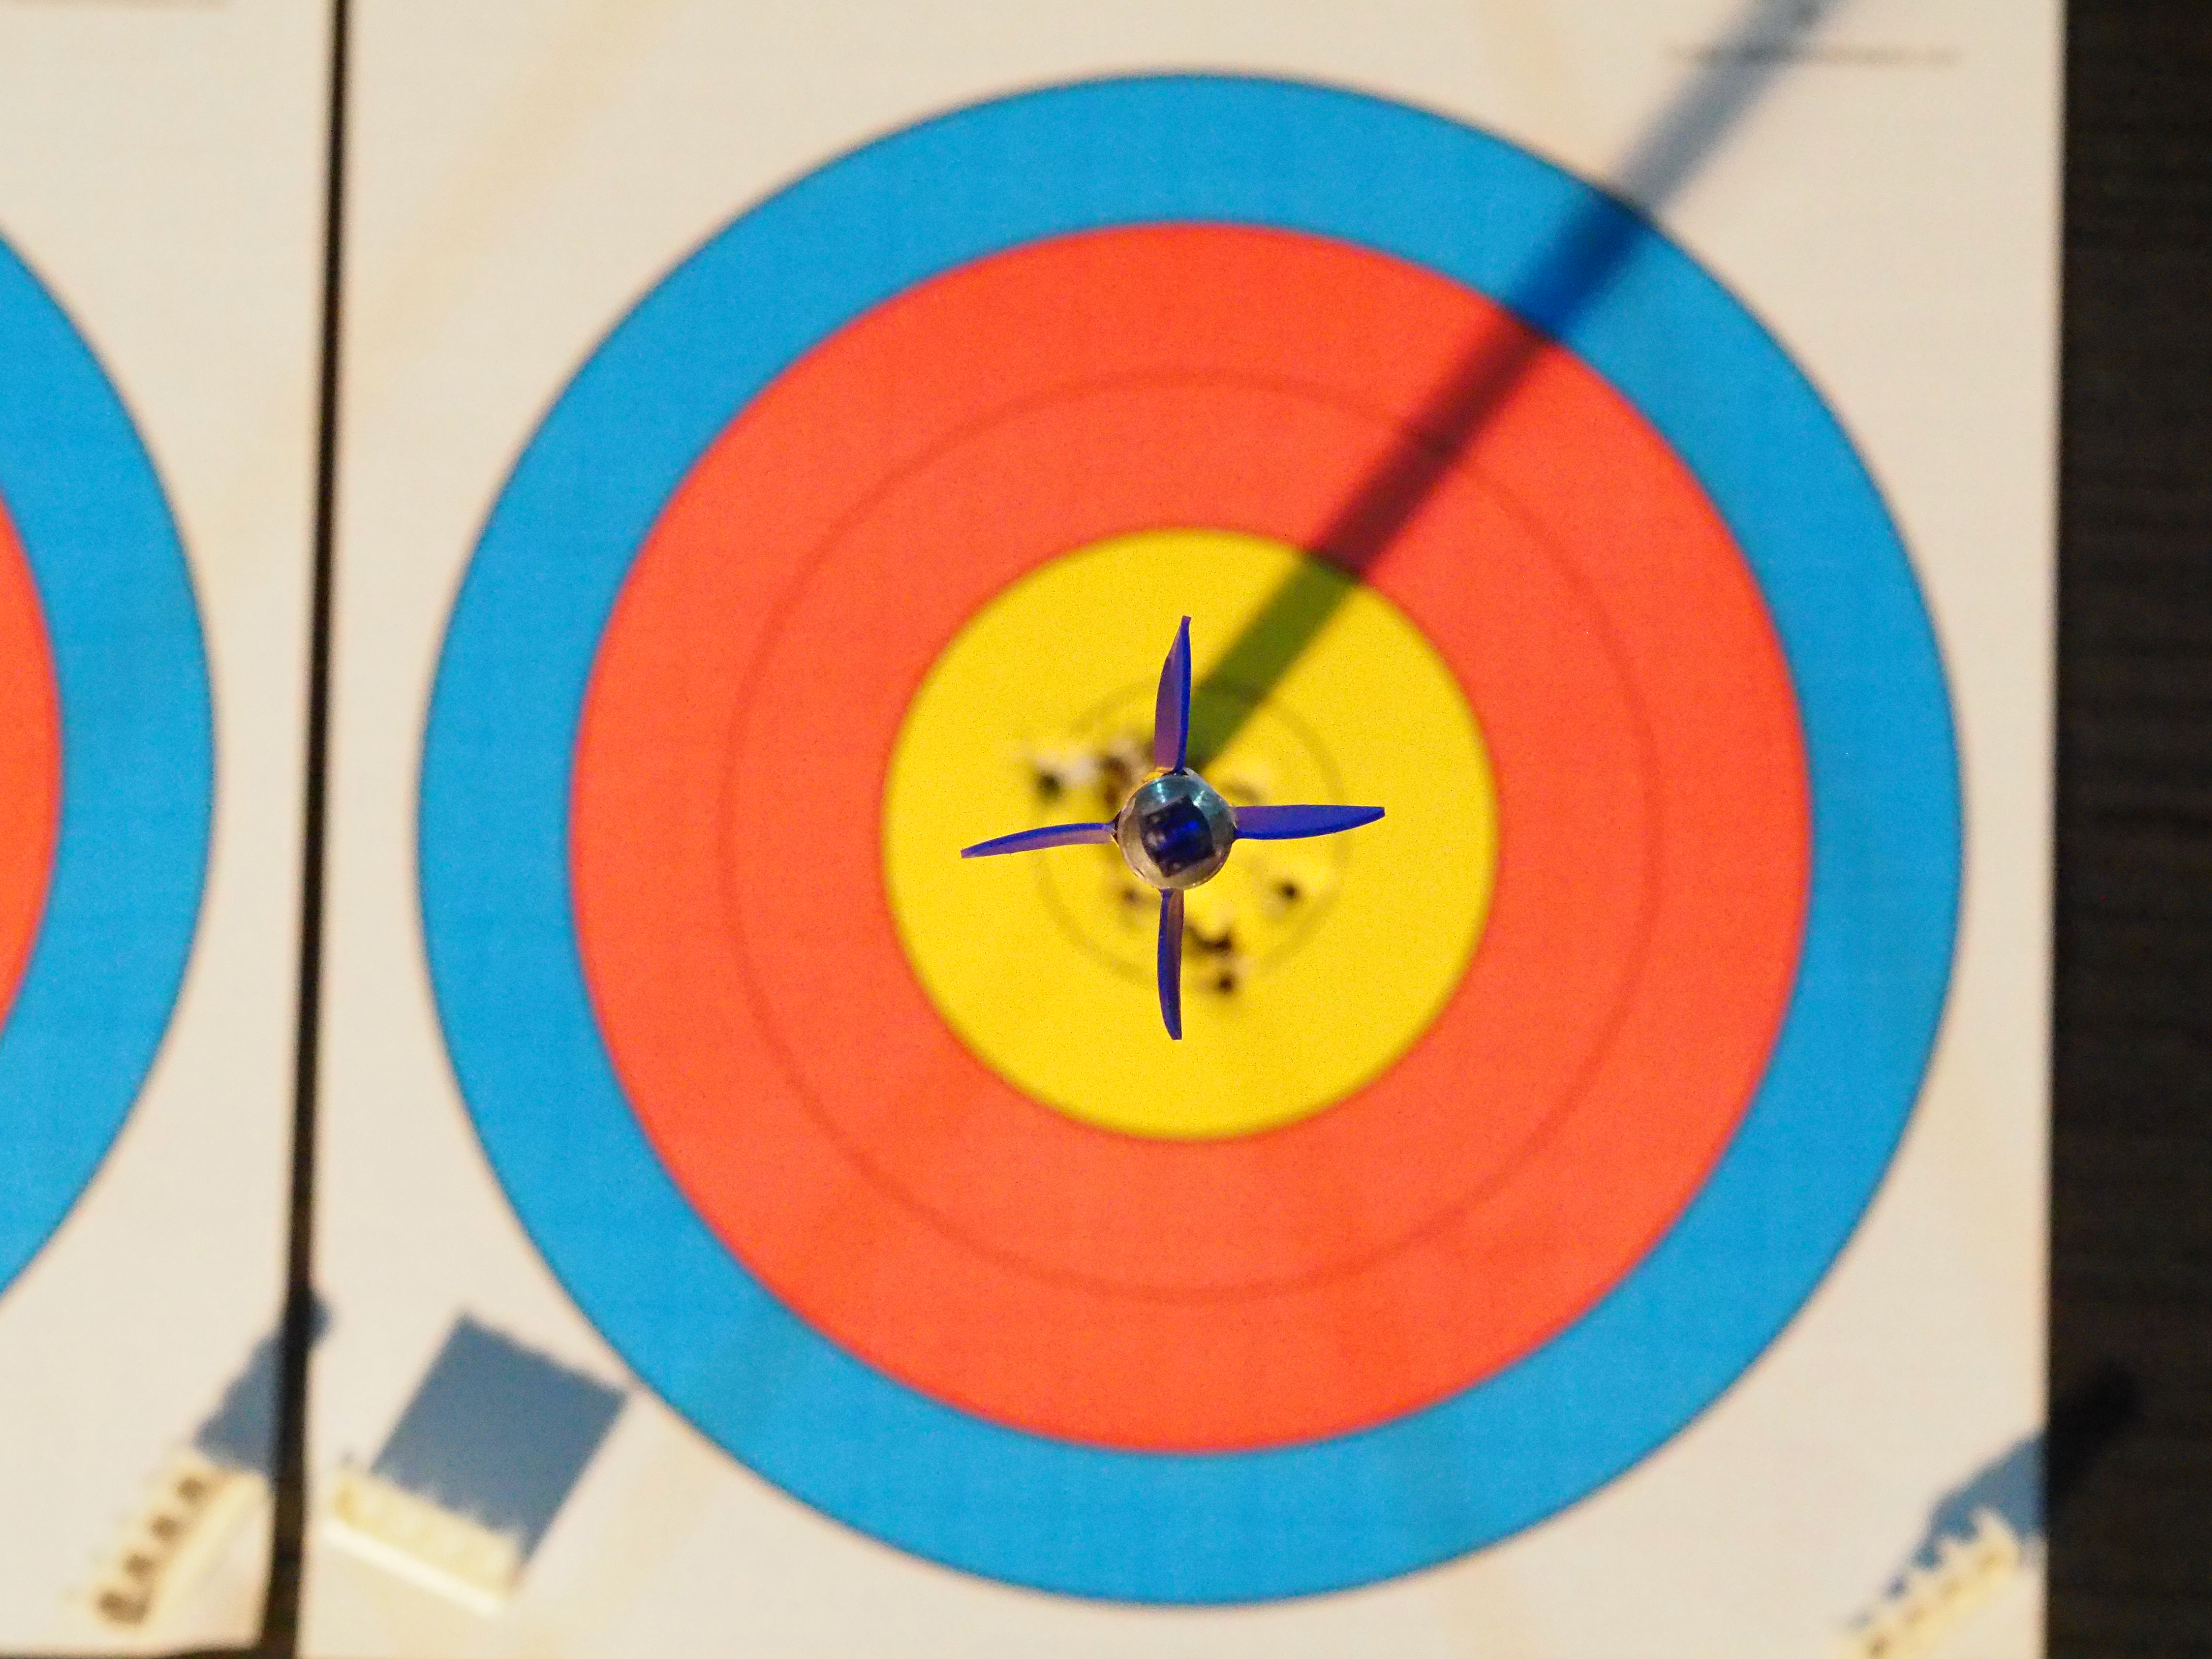 Fancy trying archery on a cruise ship?